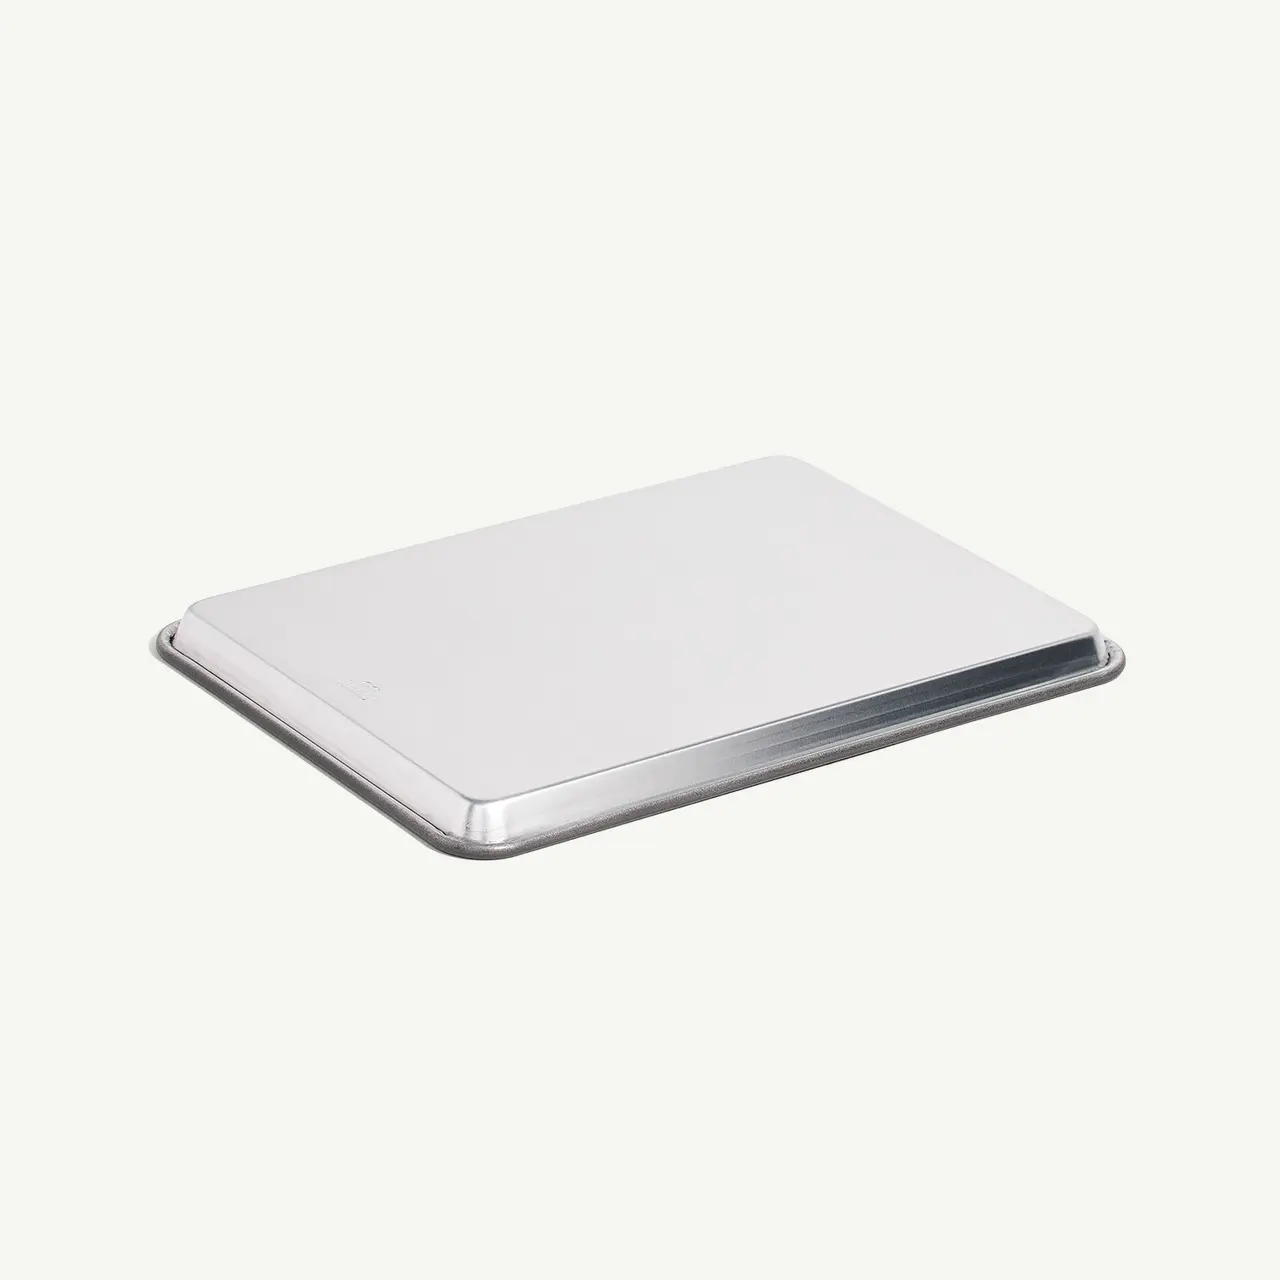 A closed silver laptop is positioned on a plain background.